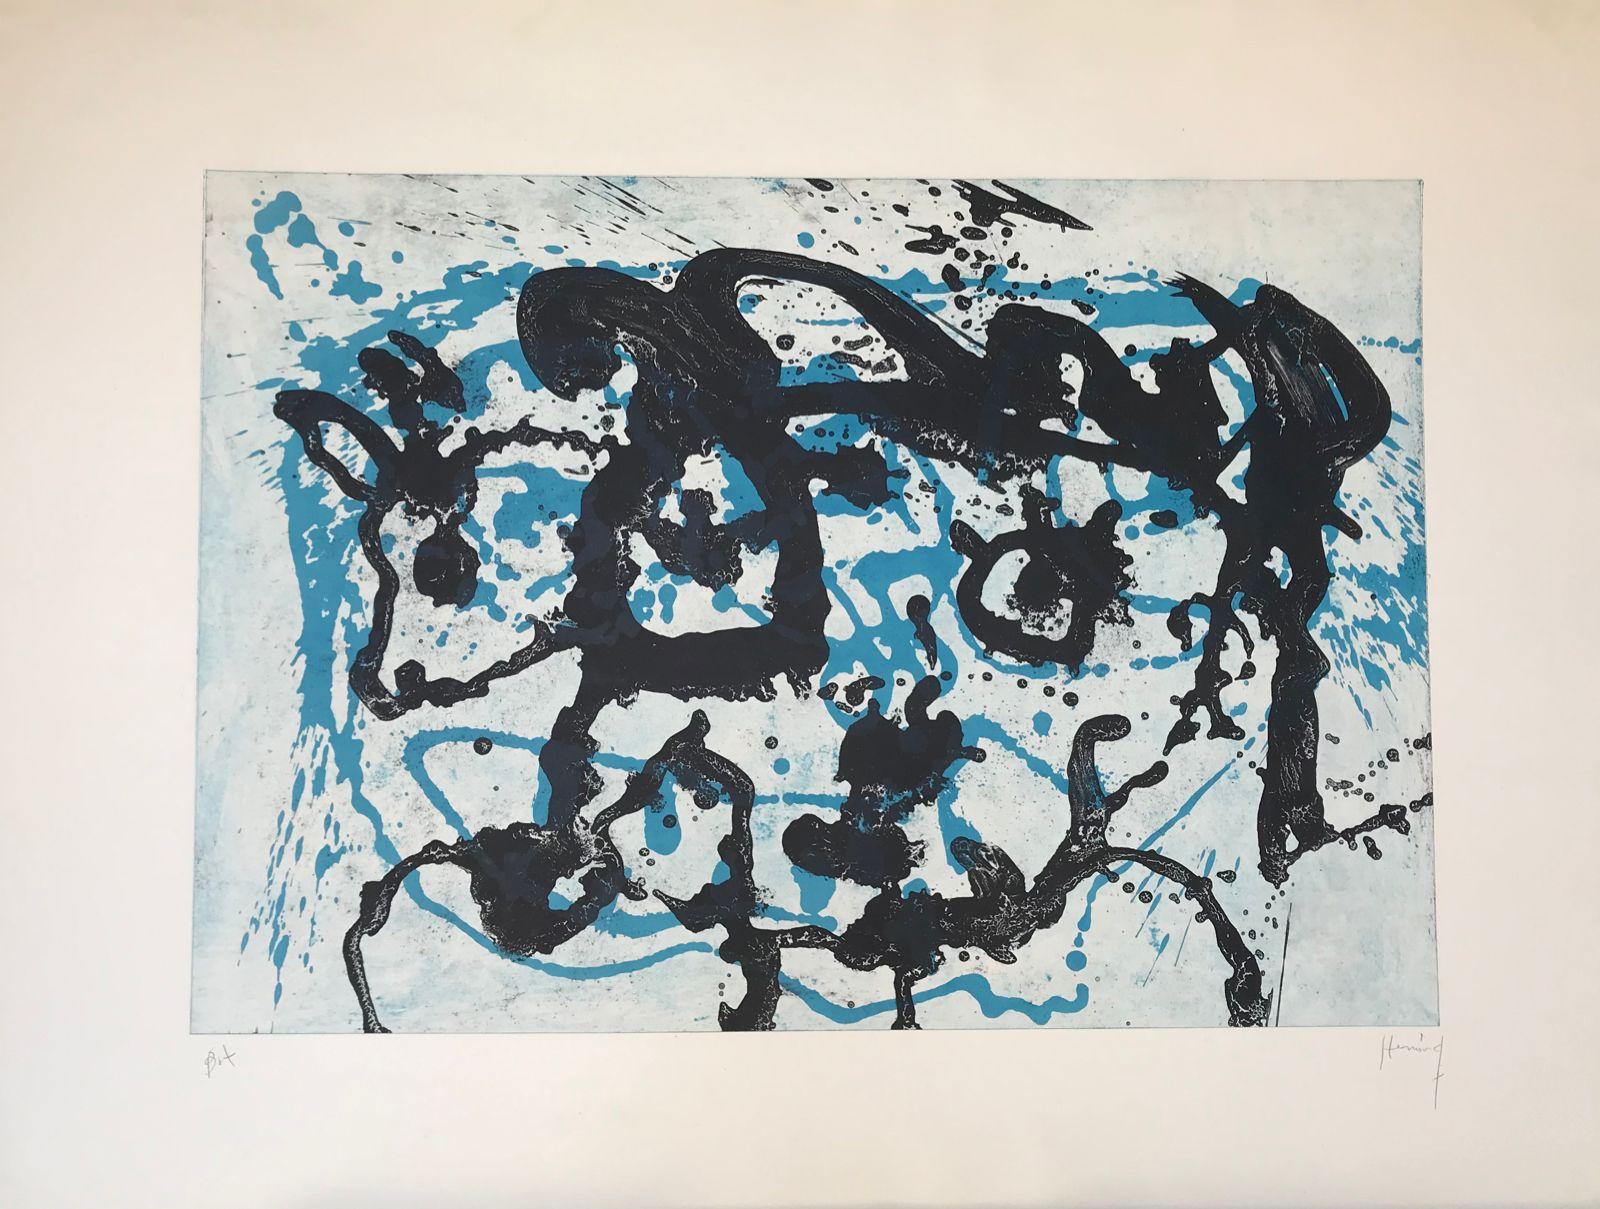 "Sergio Hernández (Mexico, 1957)
'Observatorio I', 2016
lithography on zinc on paper Deponte 300 g.
39 x 51.2 in. (99 x 130 cm.)
ID: HER-198-1"





















